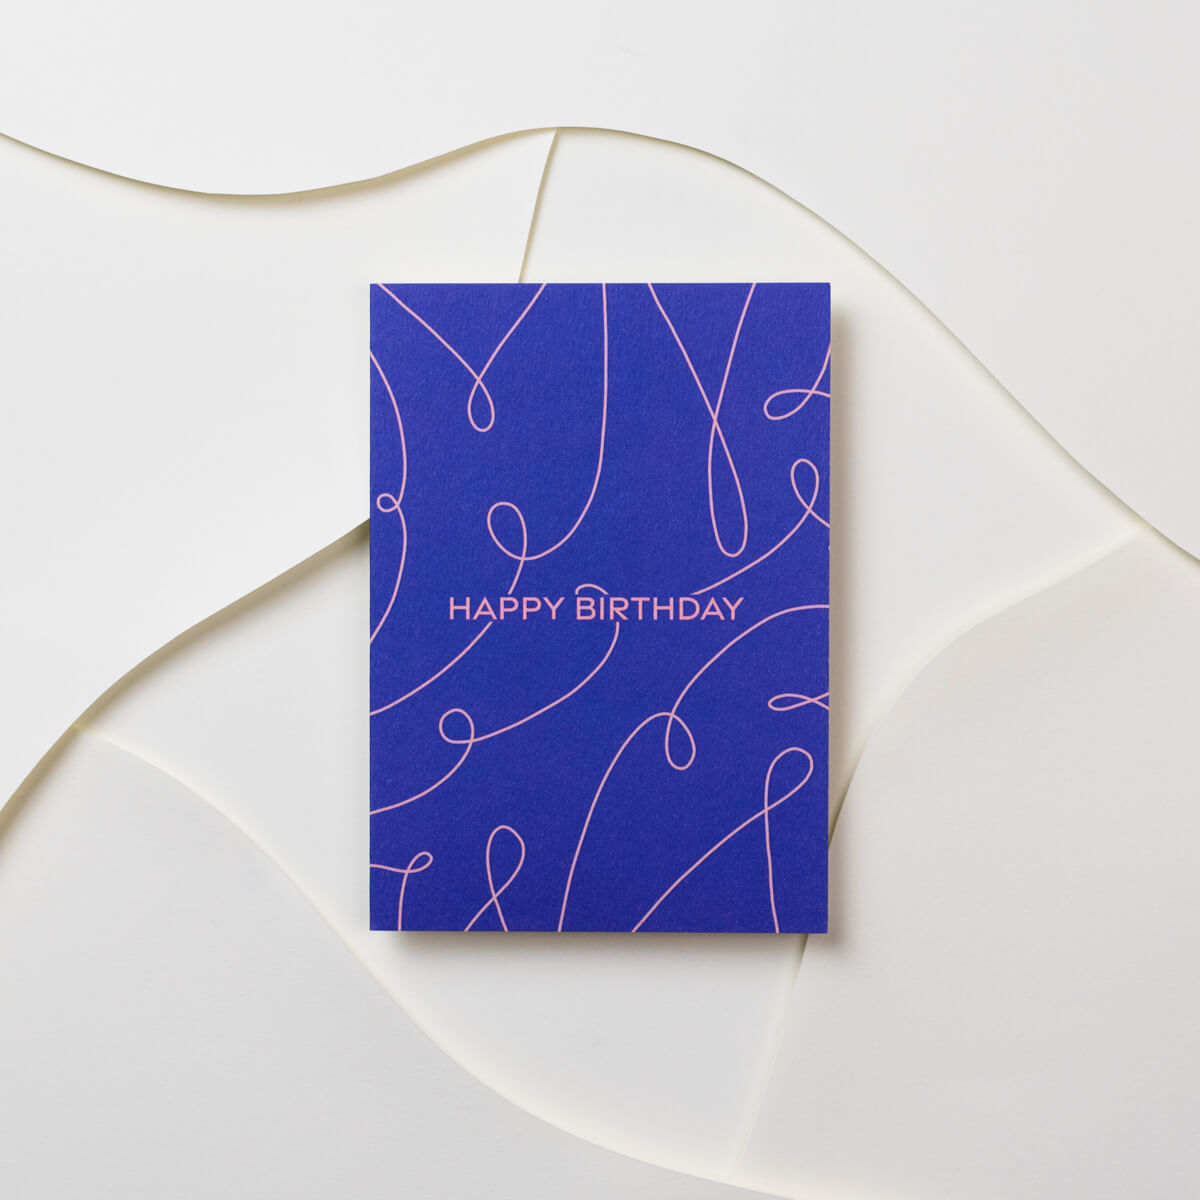 Happy Birthday Squiggles Card - The Design Palette